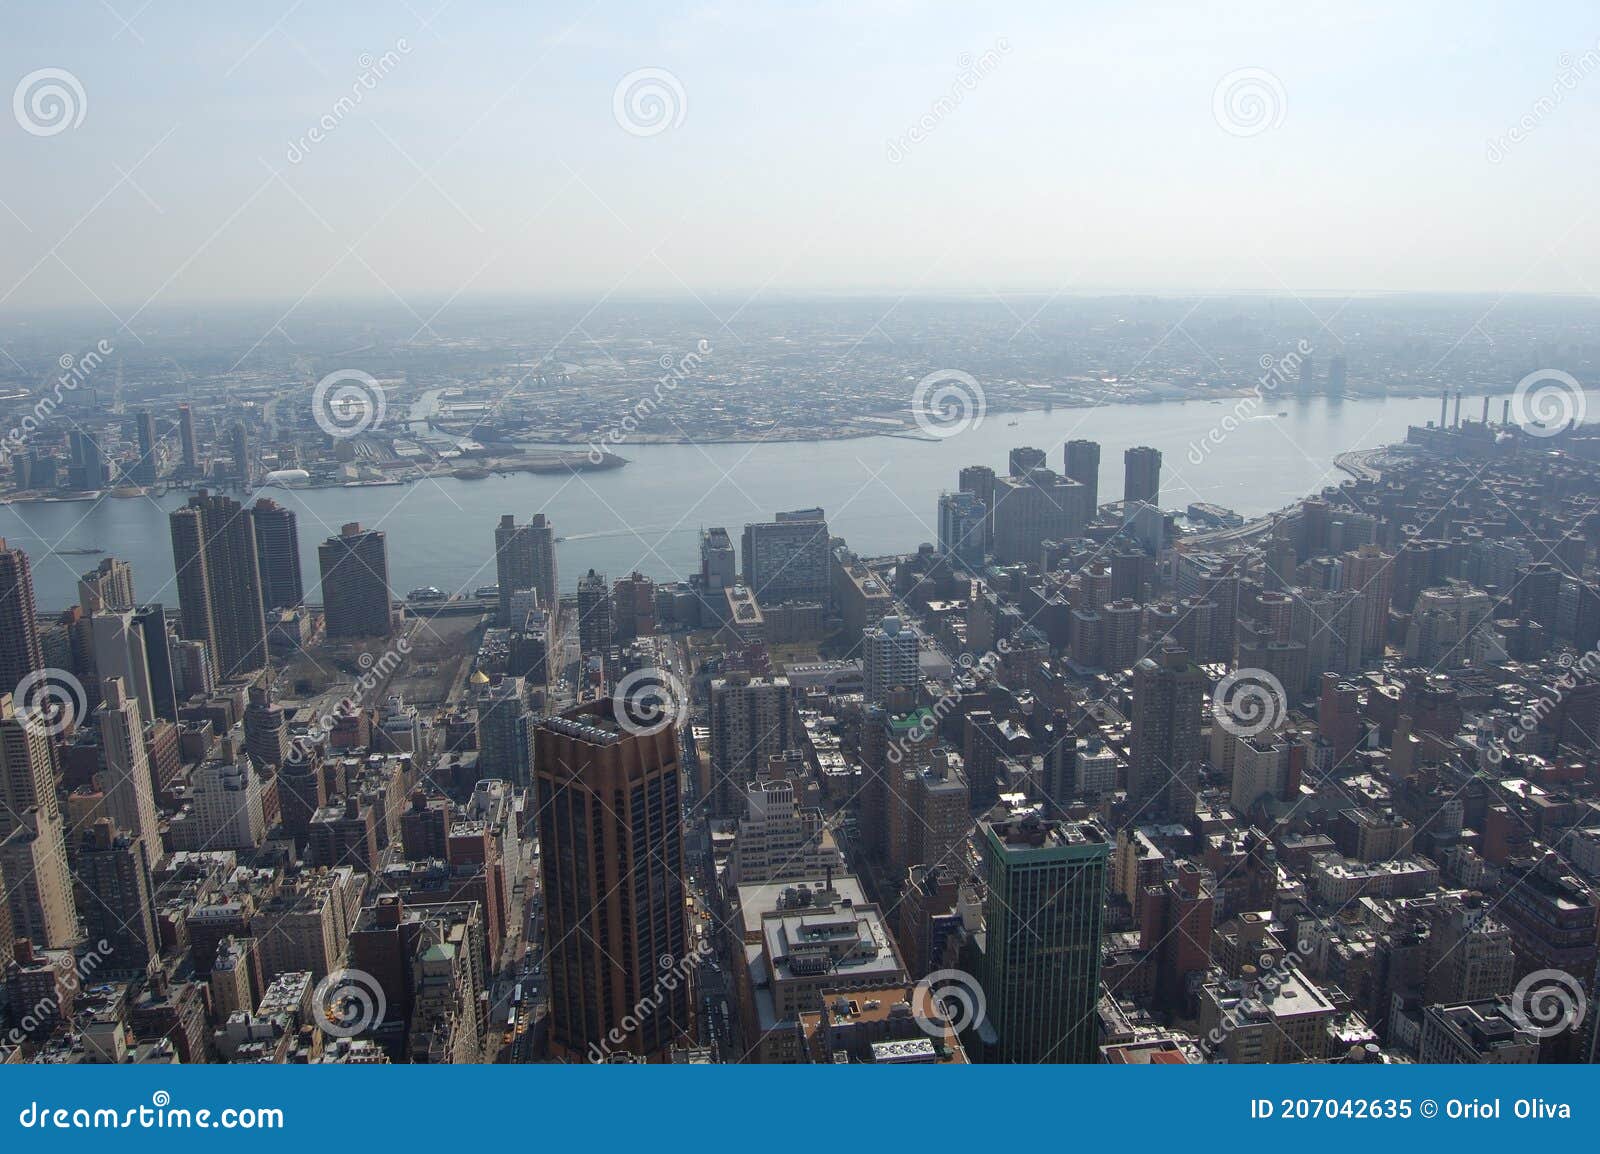 view of the most emblematic buildings and skyscrapers of manhattan (new york).